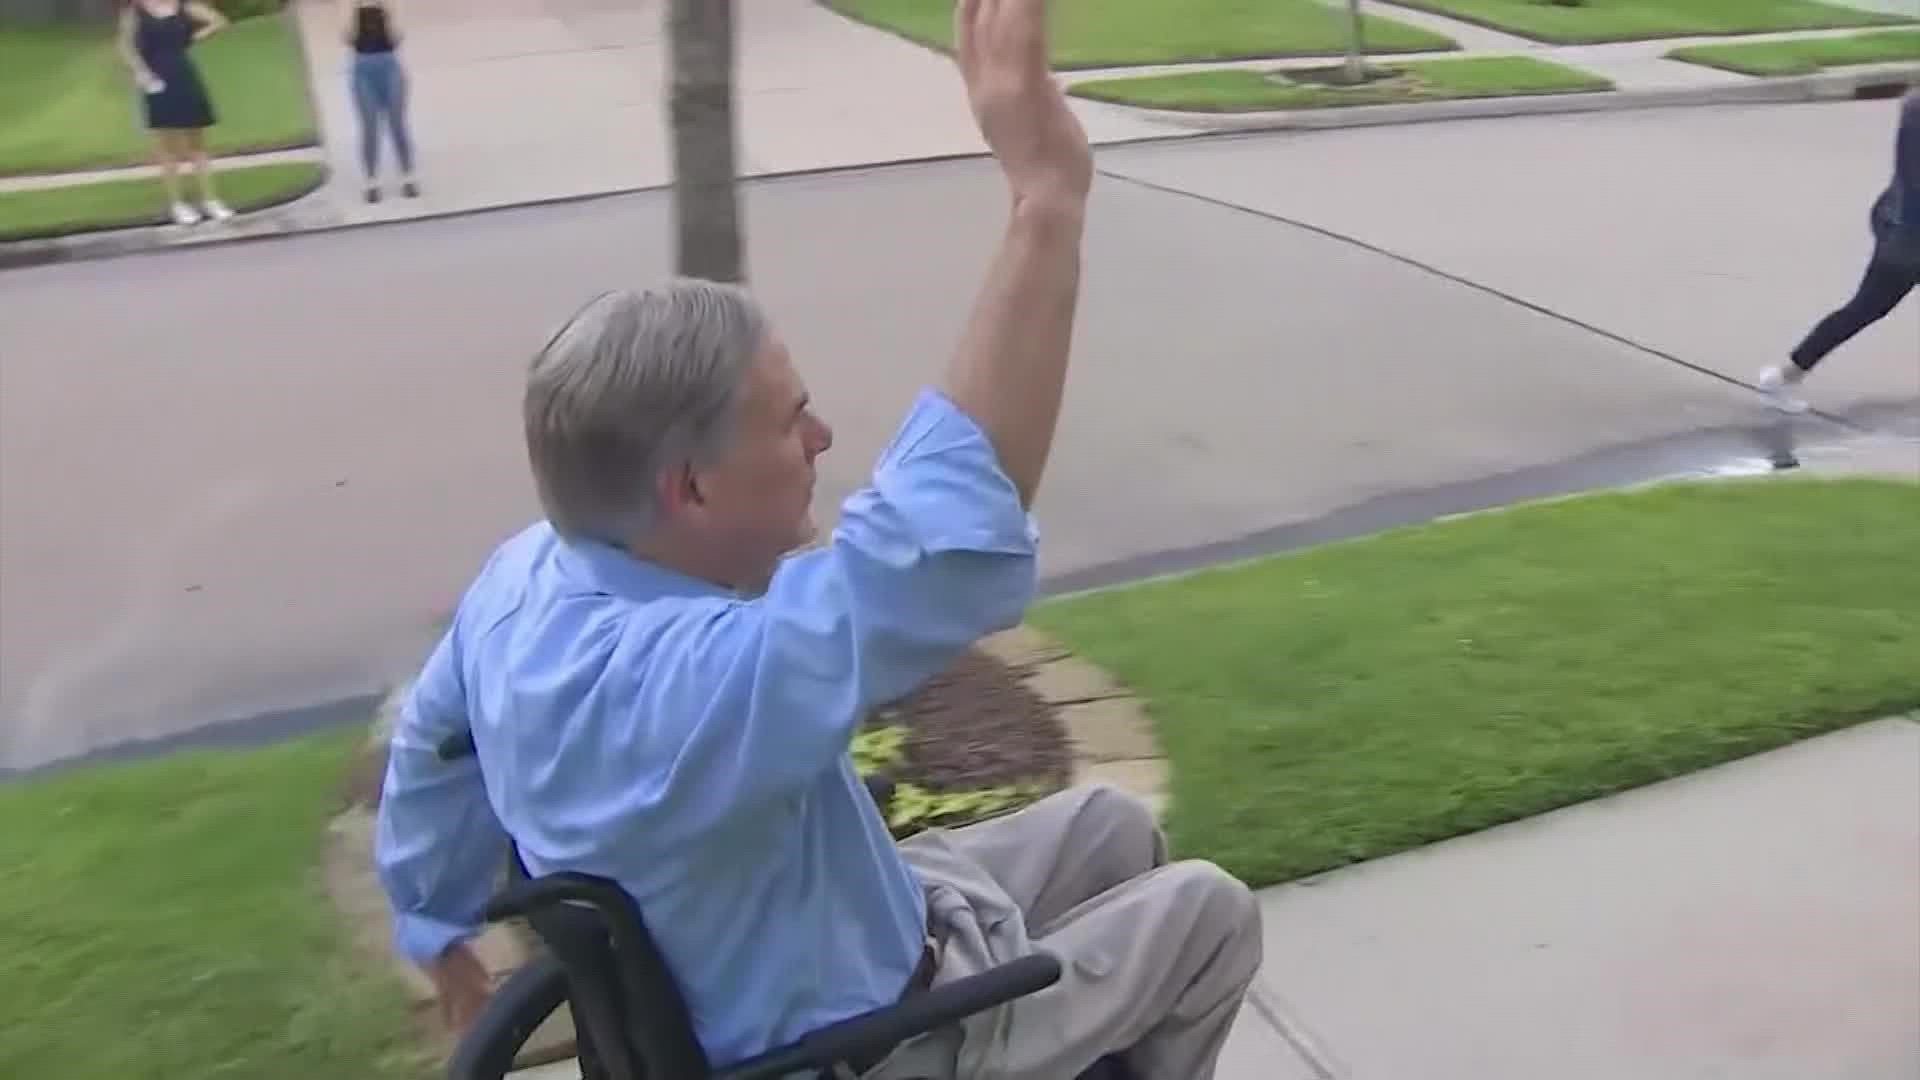 Suburban voters are a key block of voters Gov. Abbott has leaned on in the past.